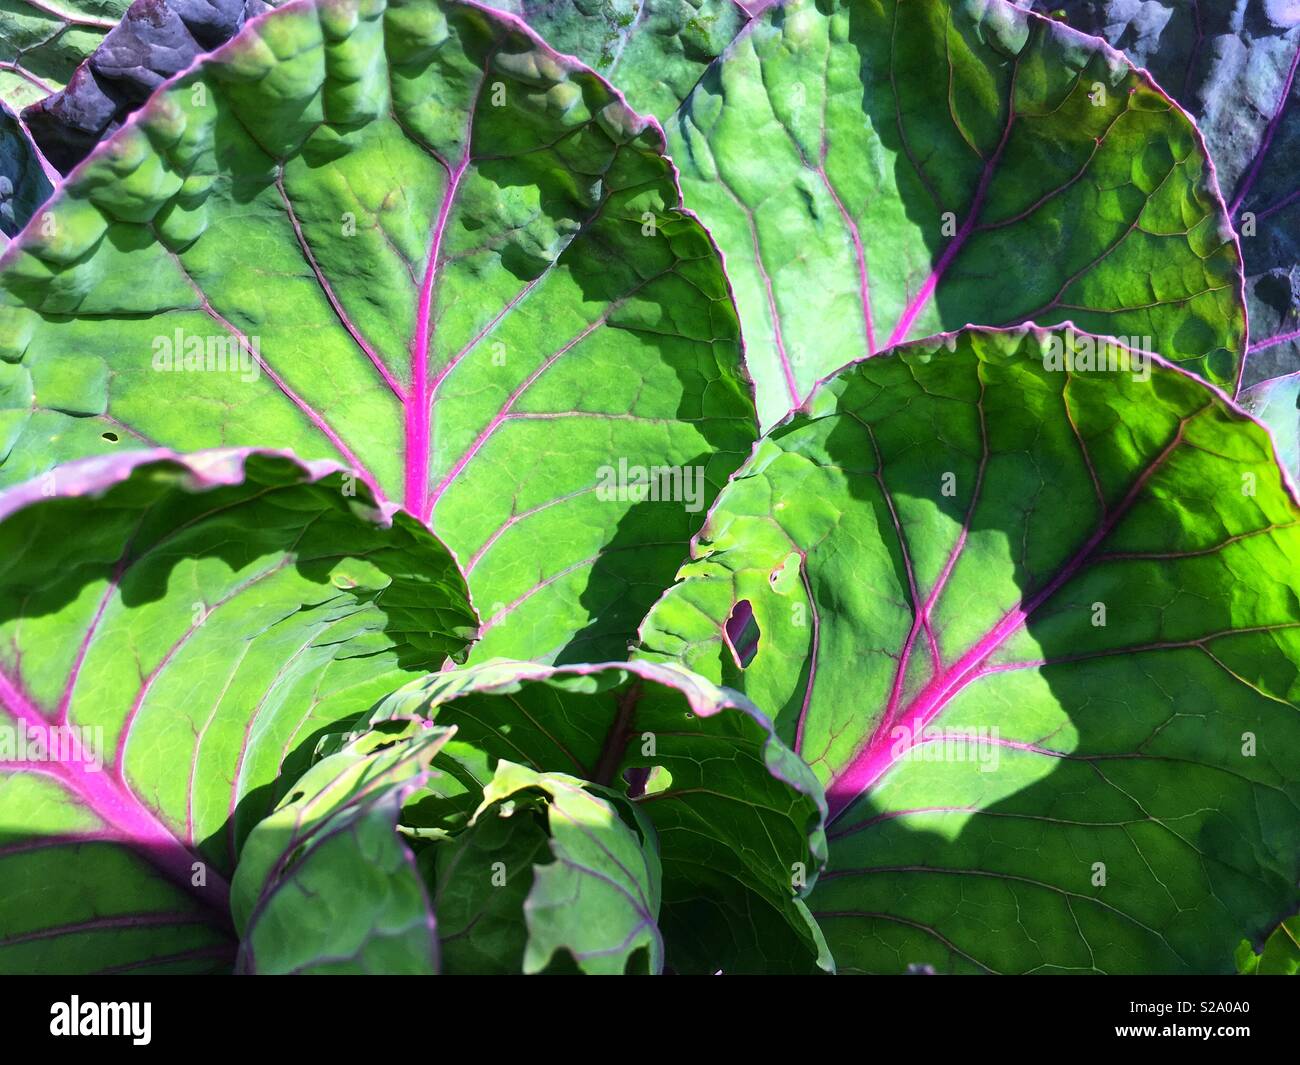 Red cabbage plant Stock Photo